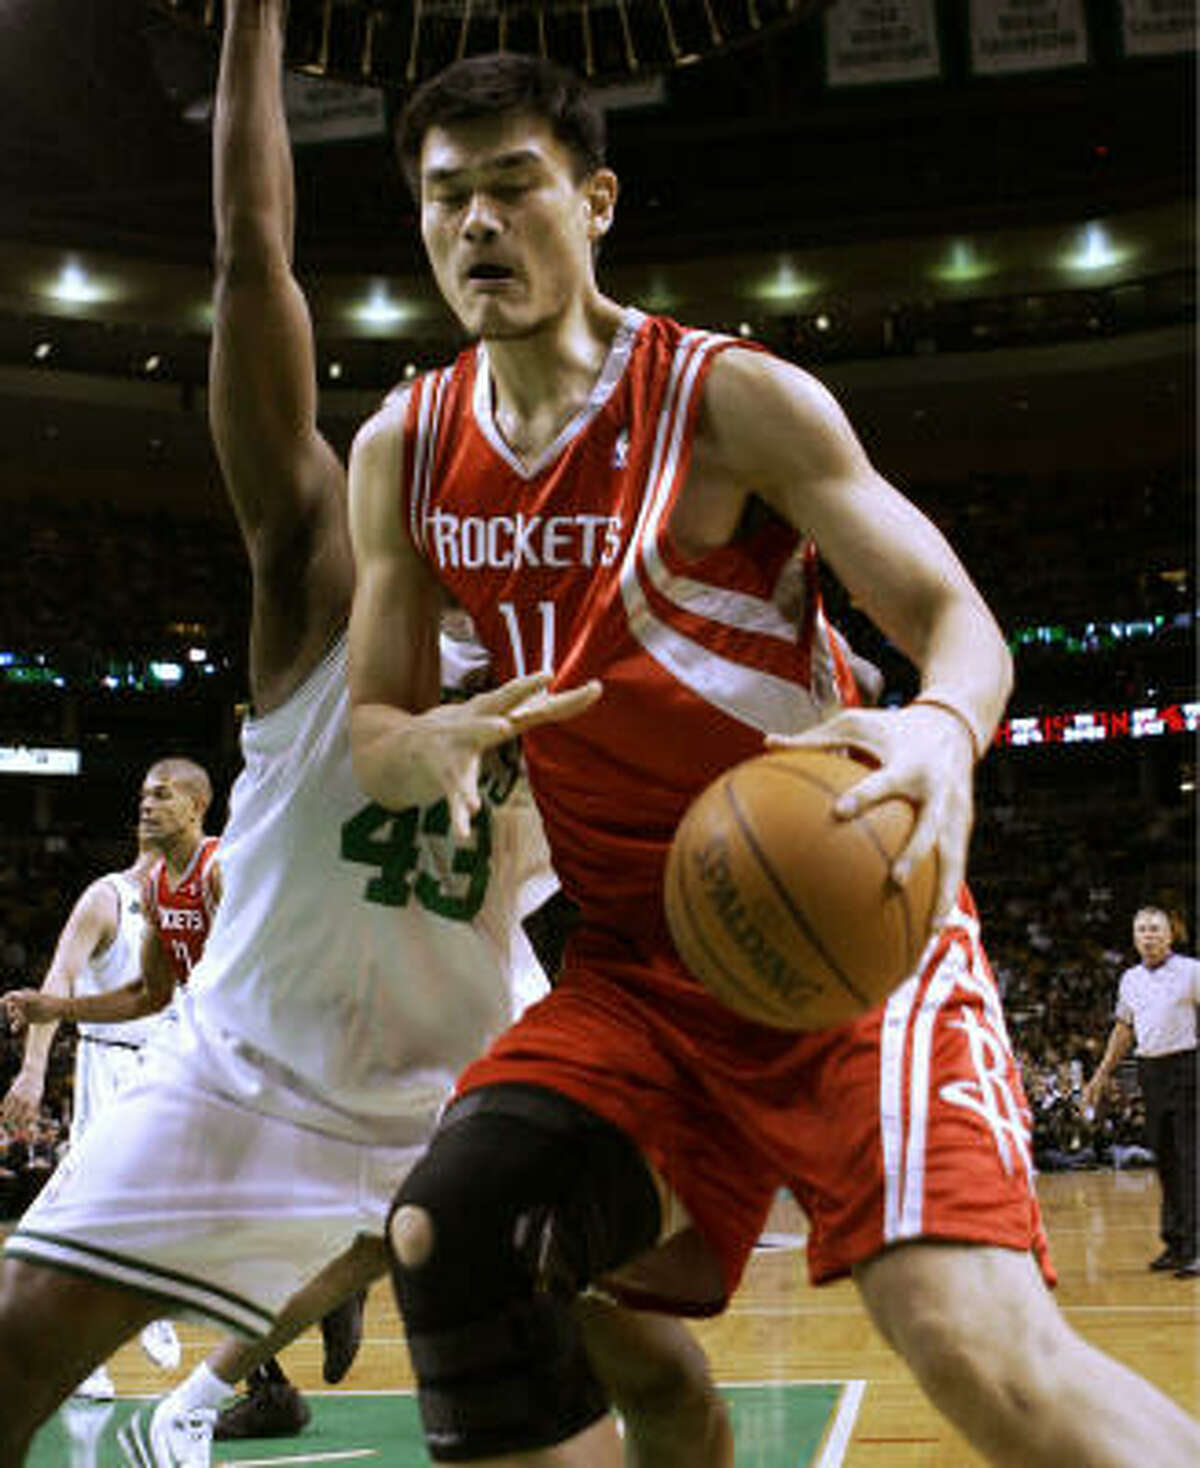 Yao Ming scored 11 points in 19 minutes in his second game since returning from a broken leg.